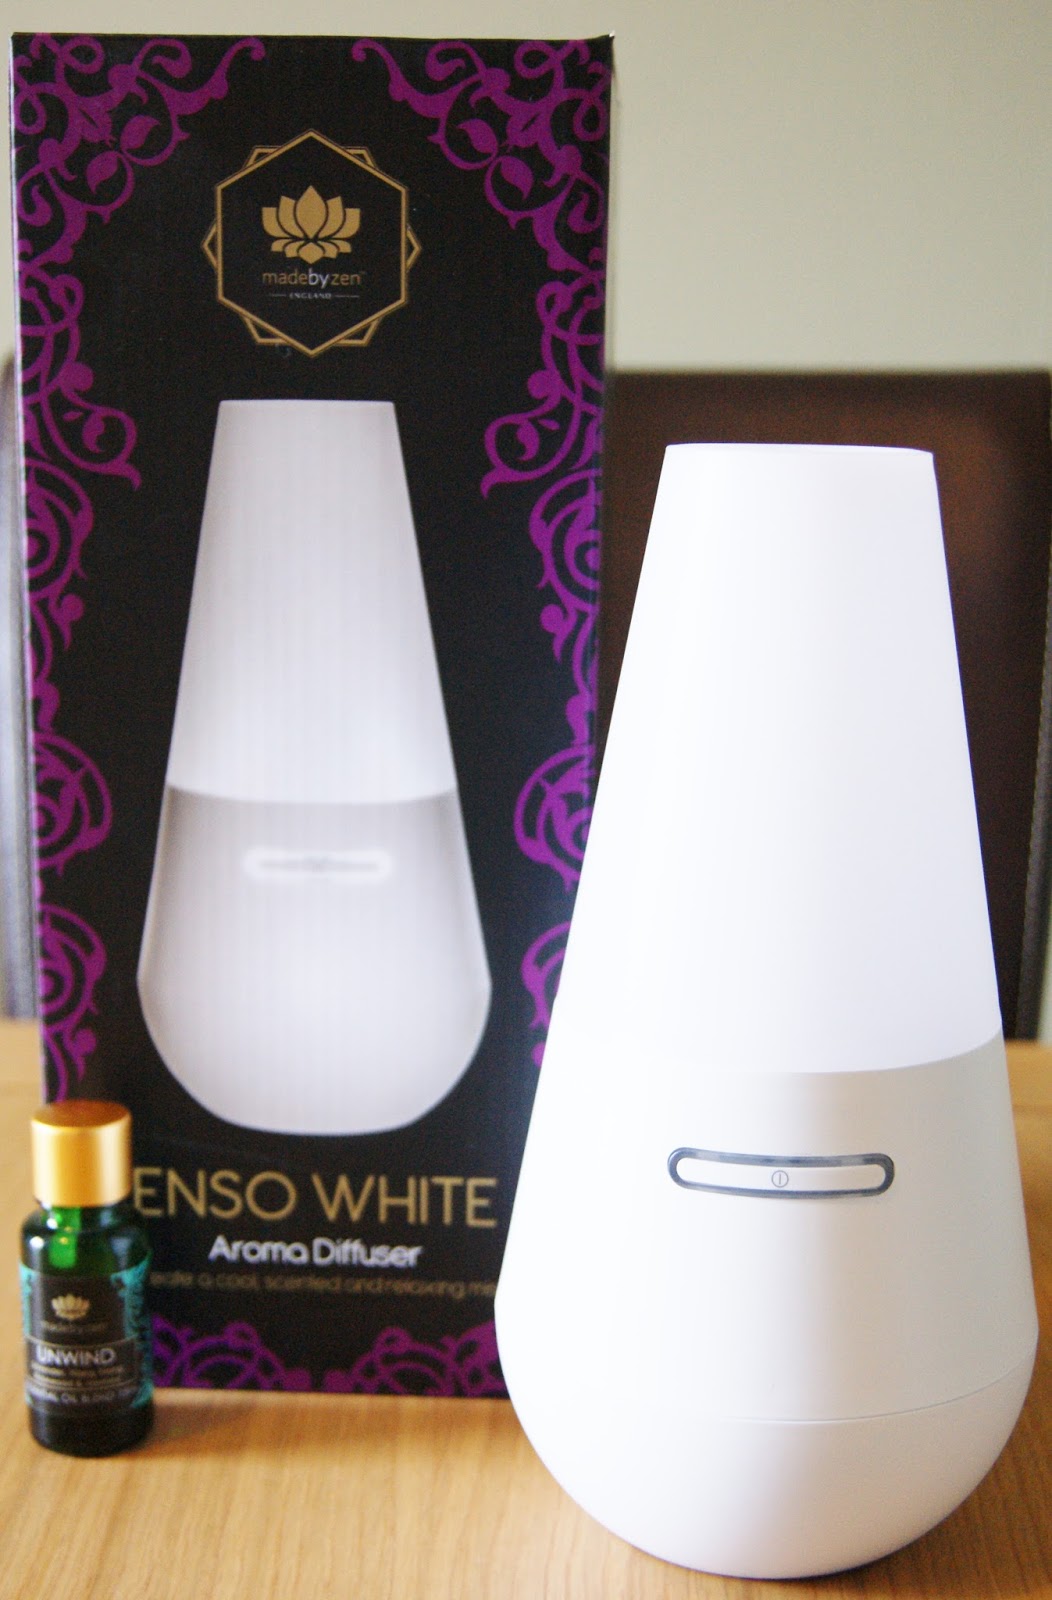 Enso White Aroma Diffuser Review